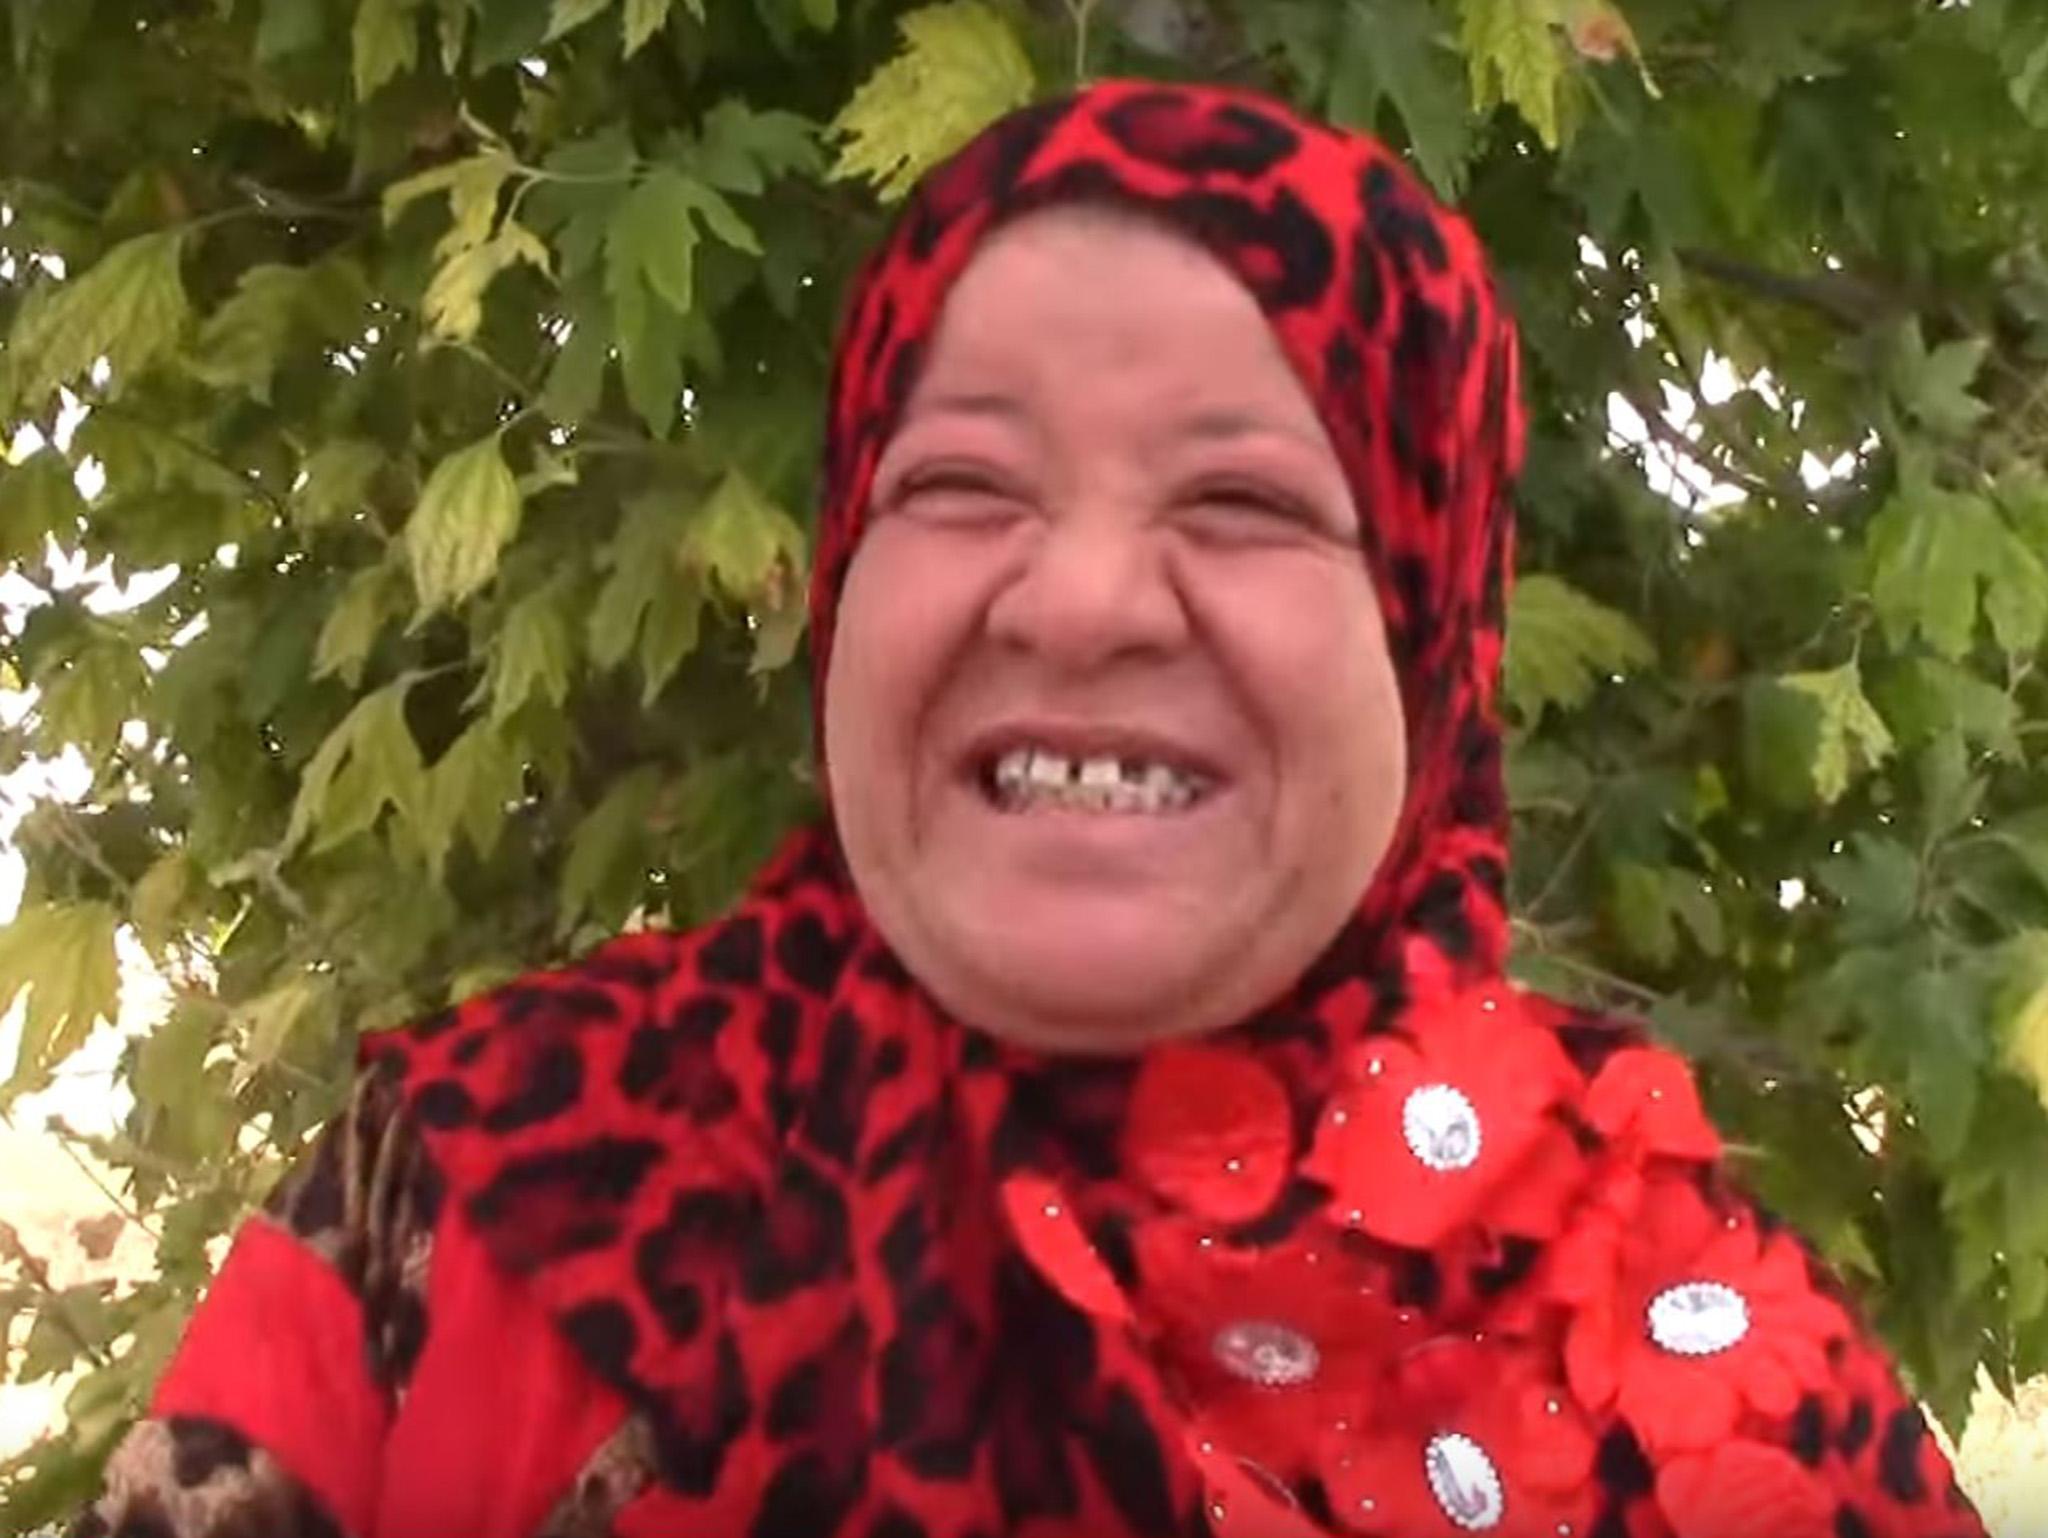 Khadija Abdu Al-Muotee is celebrating her freedom by wearing red clothes